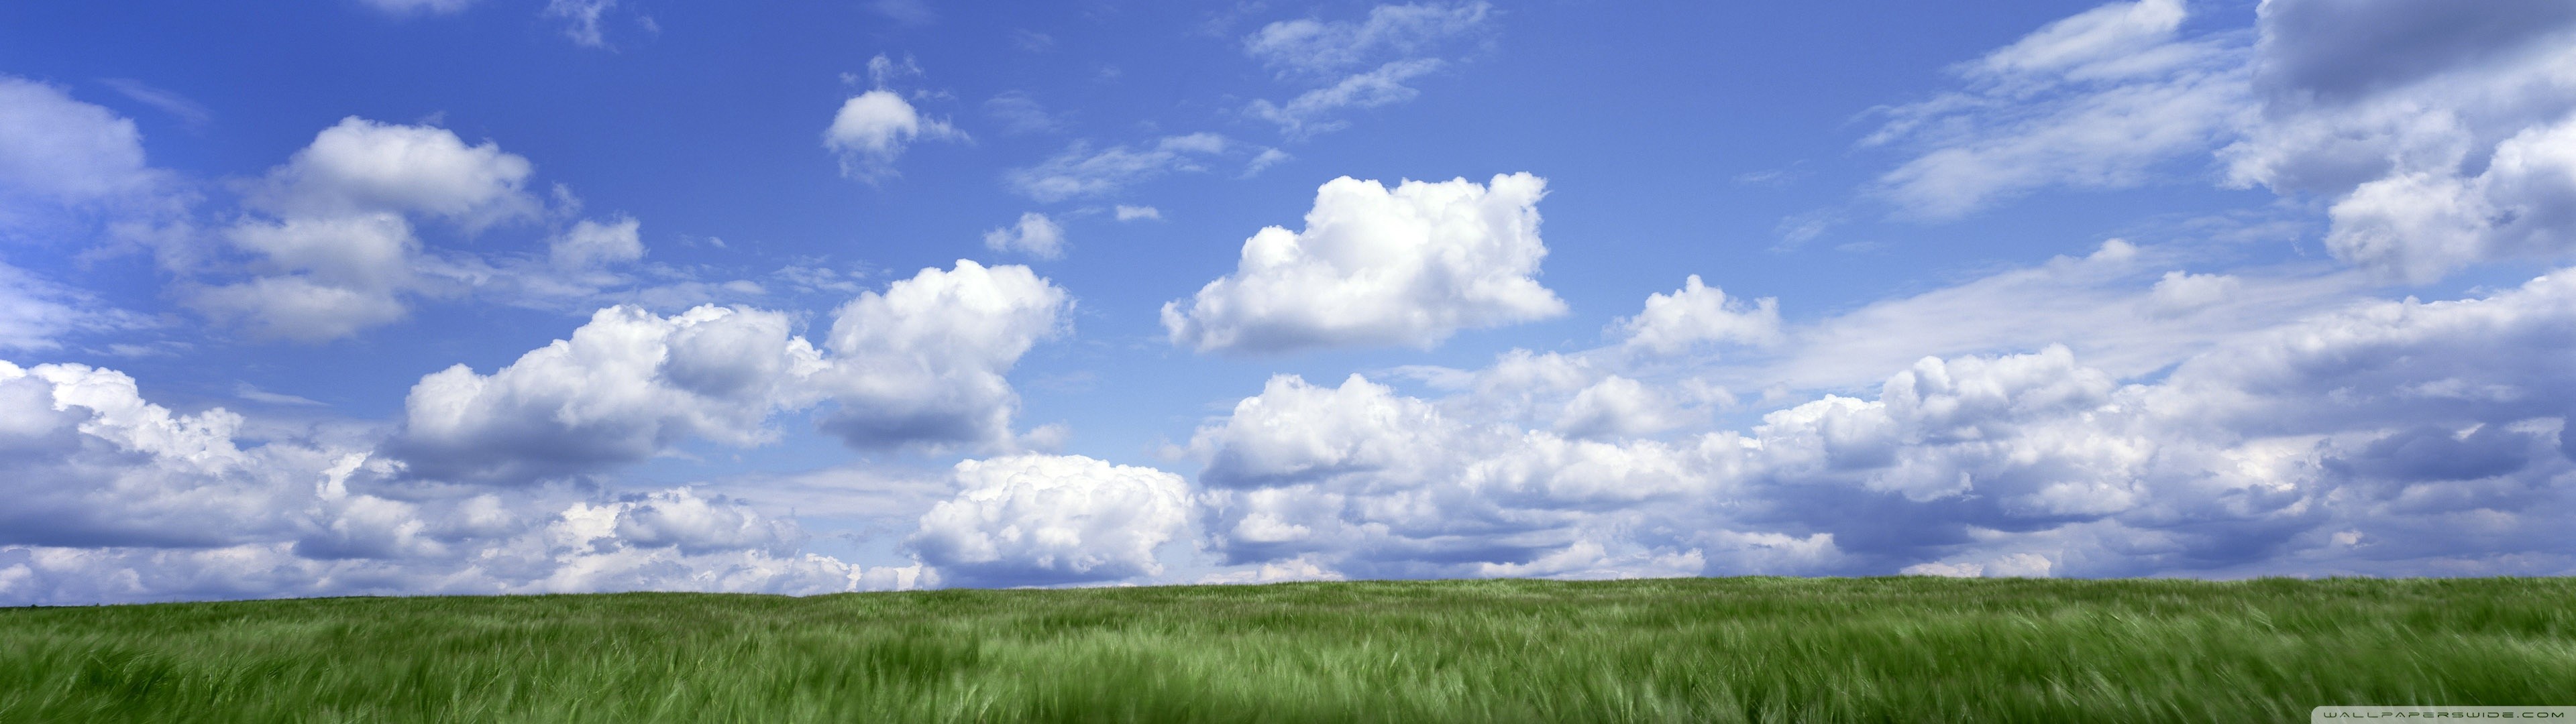 General 3840x1080 multiple display sky clouds grass nature landscape